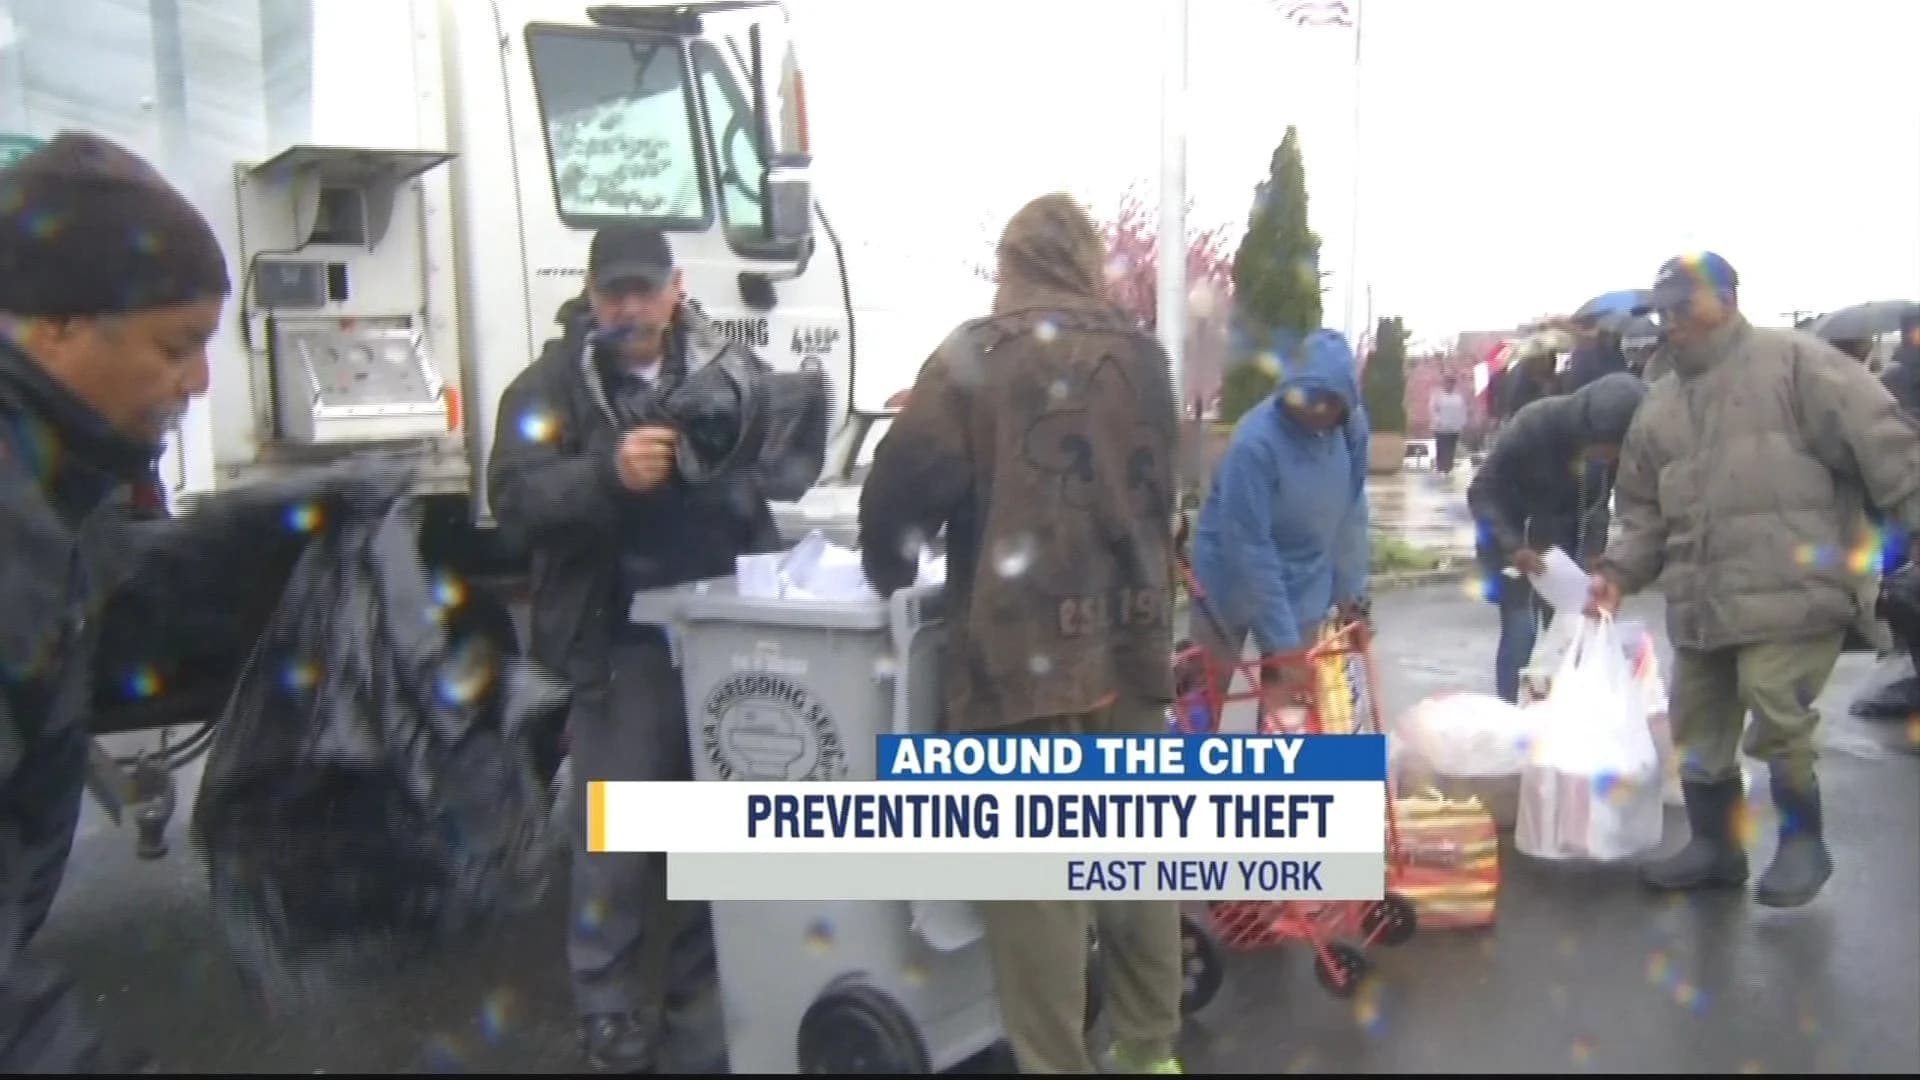 Group holds shredding event to prevent identity theft